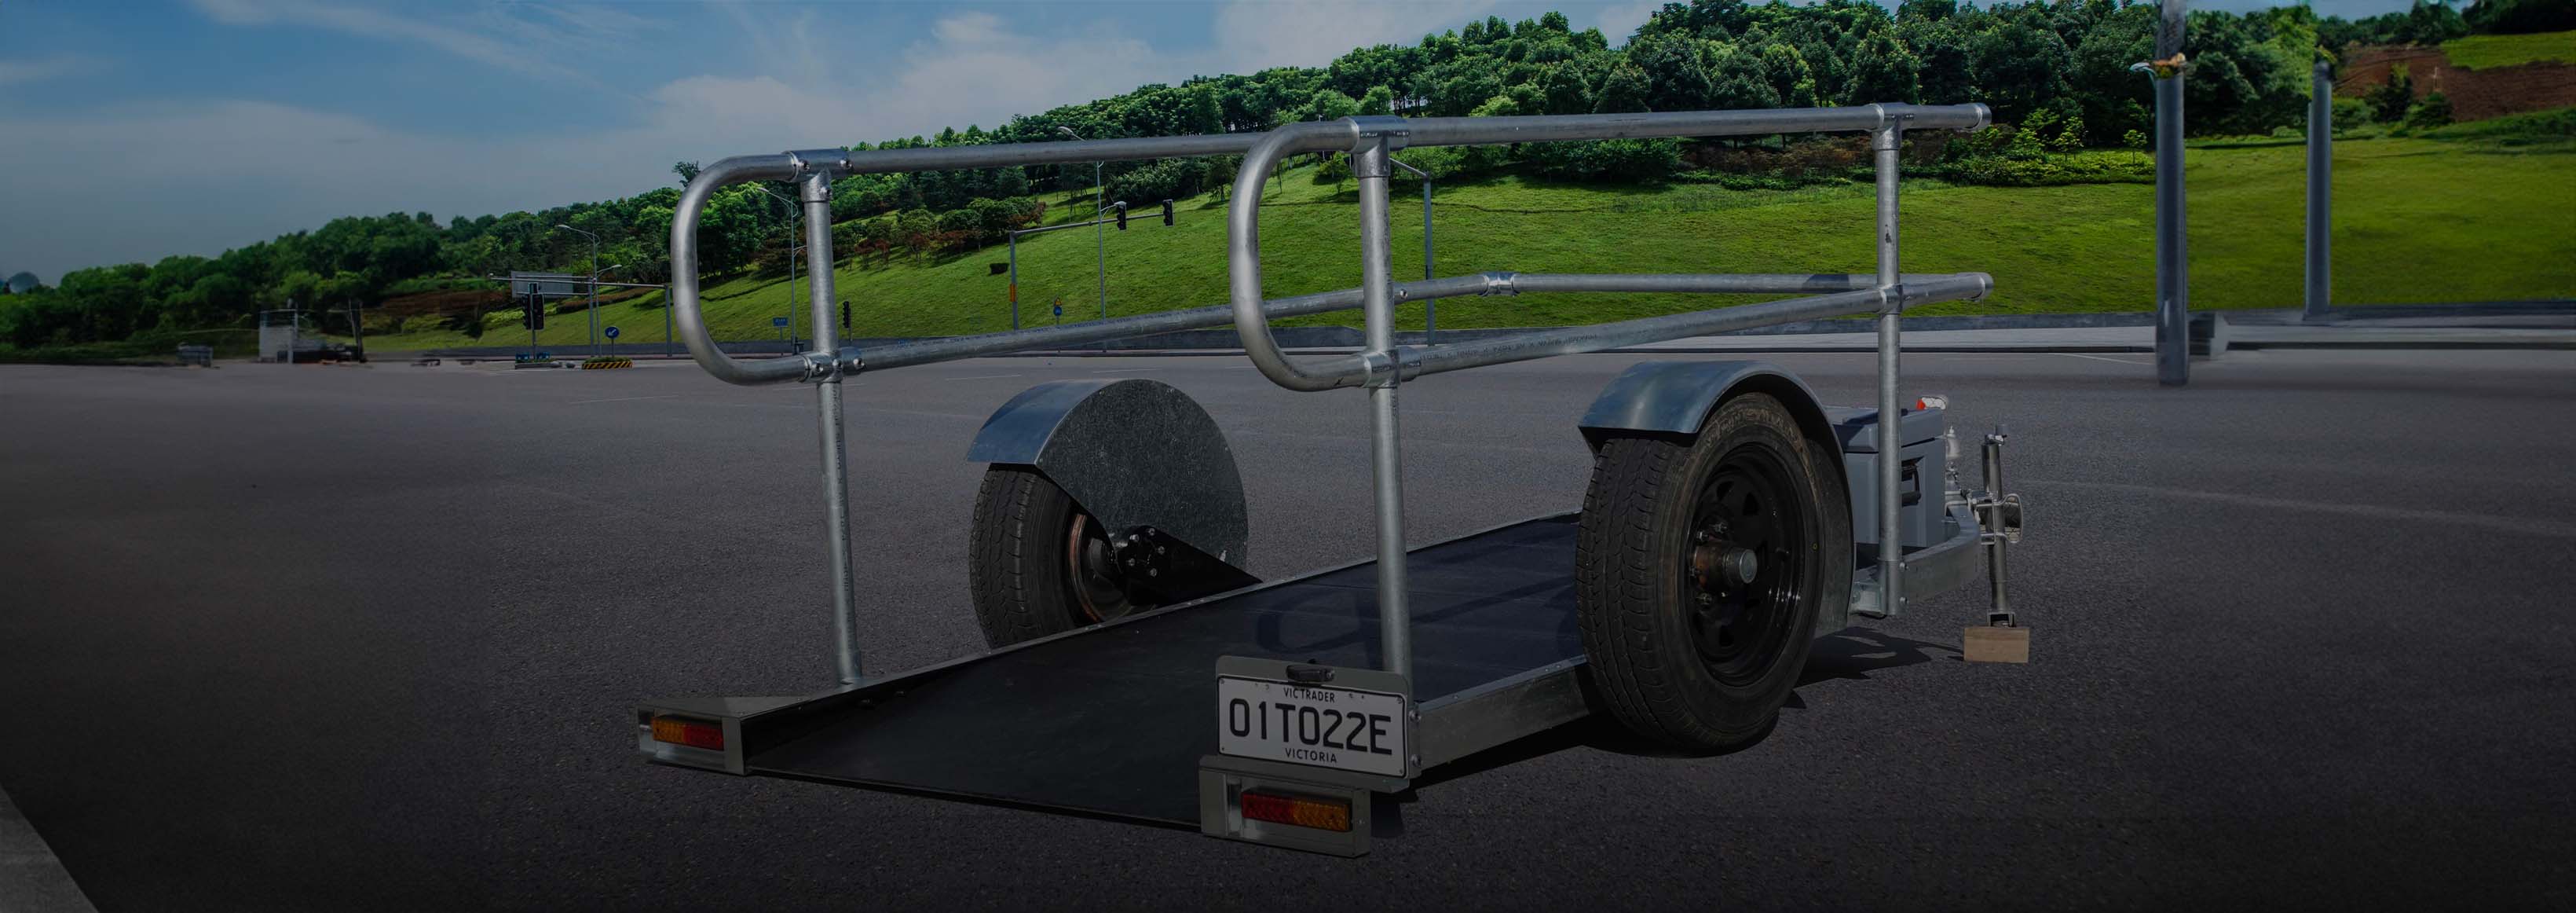 Lay Flat Mobility Scooter Trailers